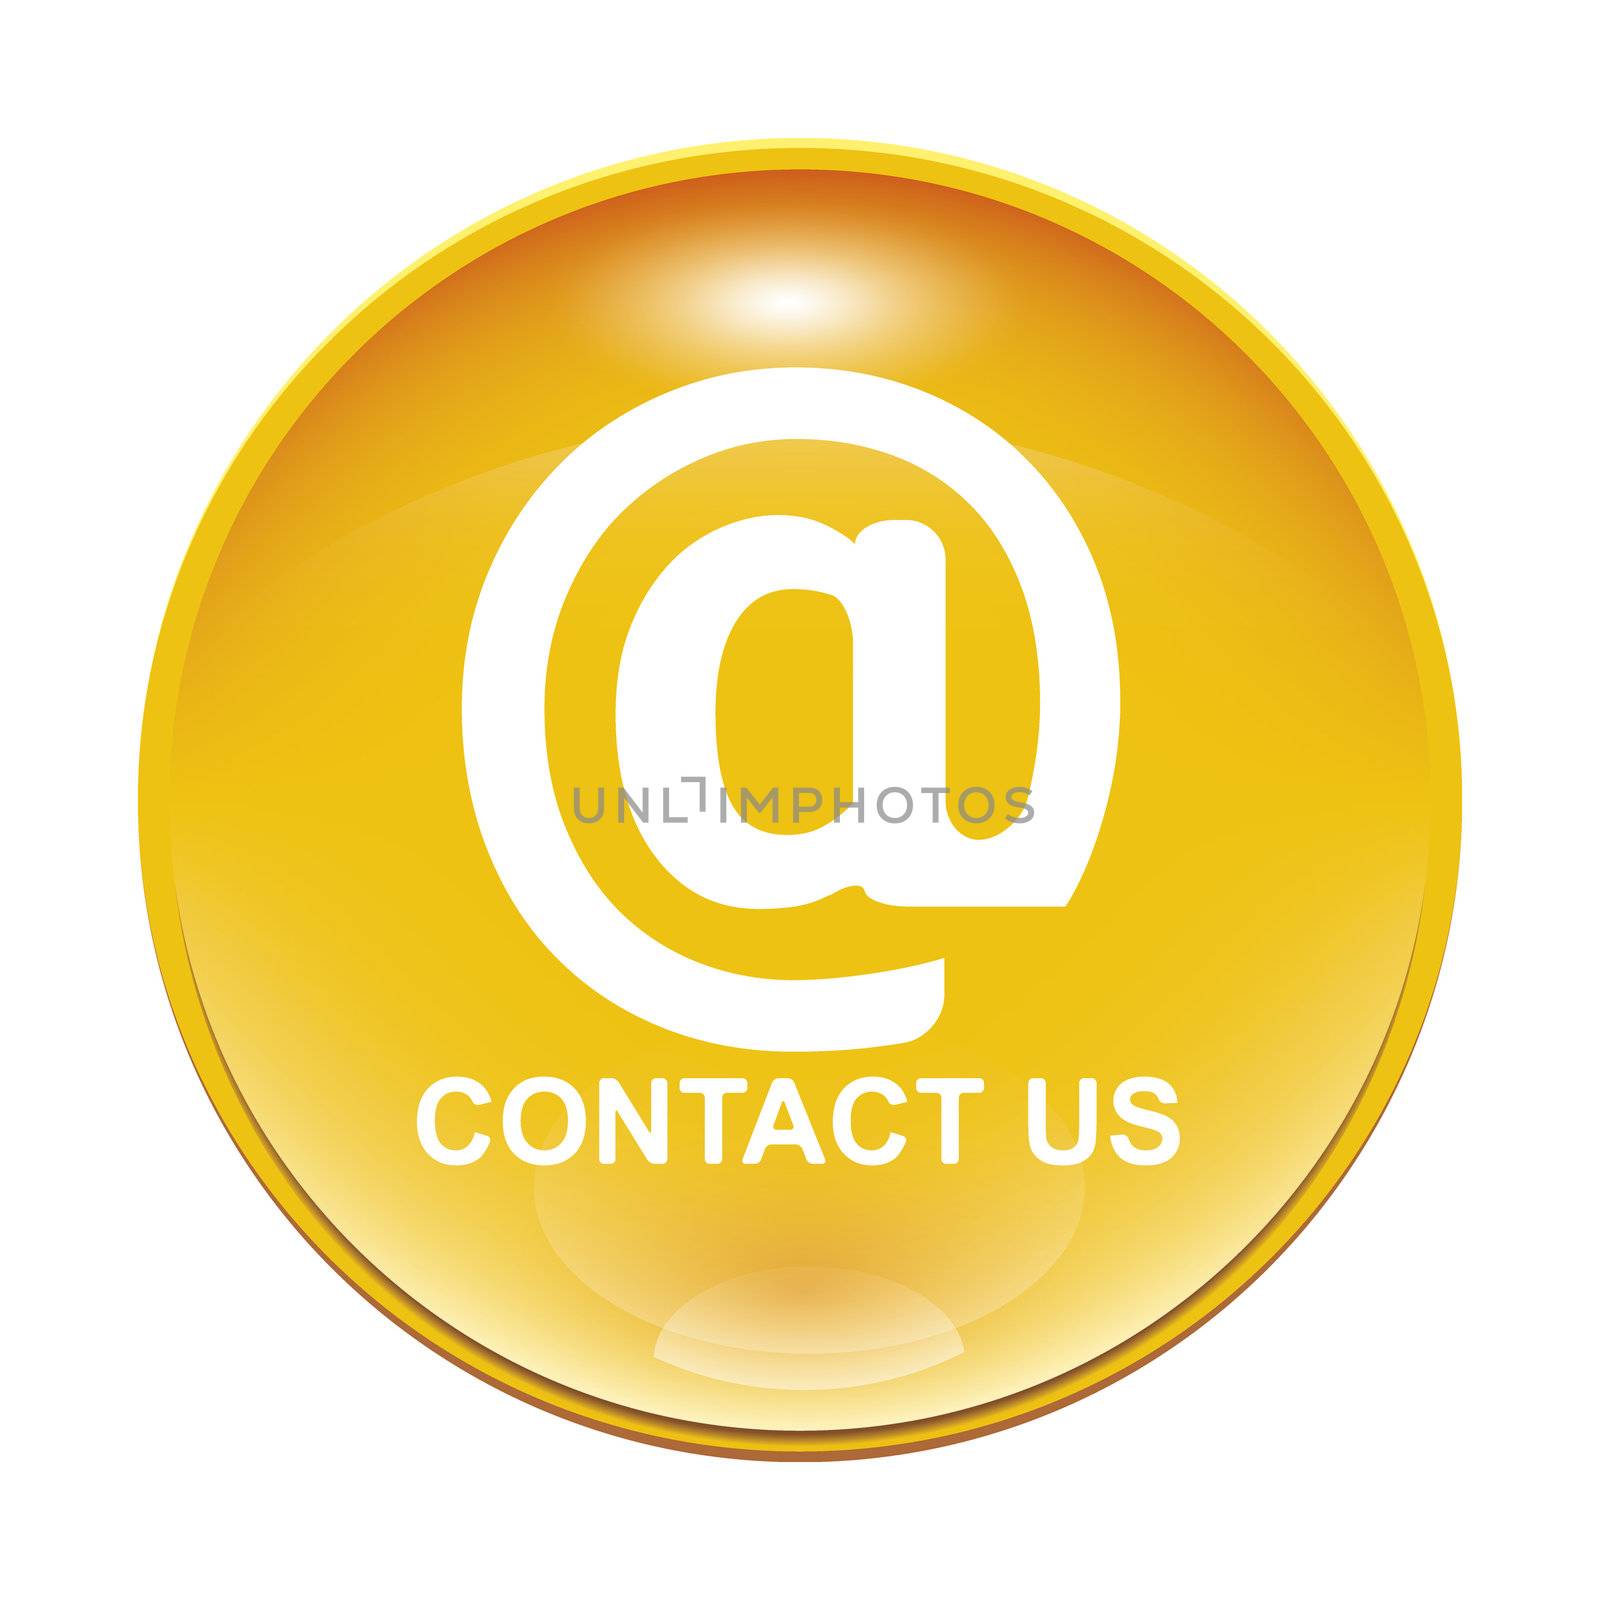 An image of a yellow contact us icon